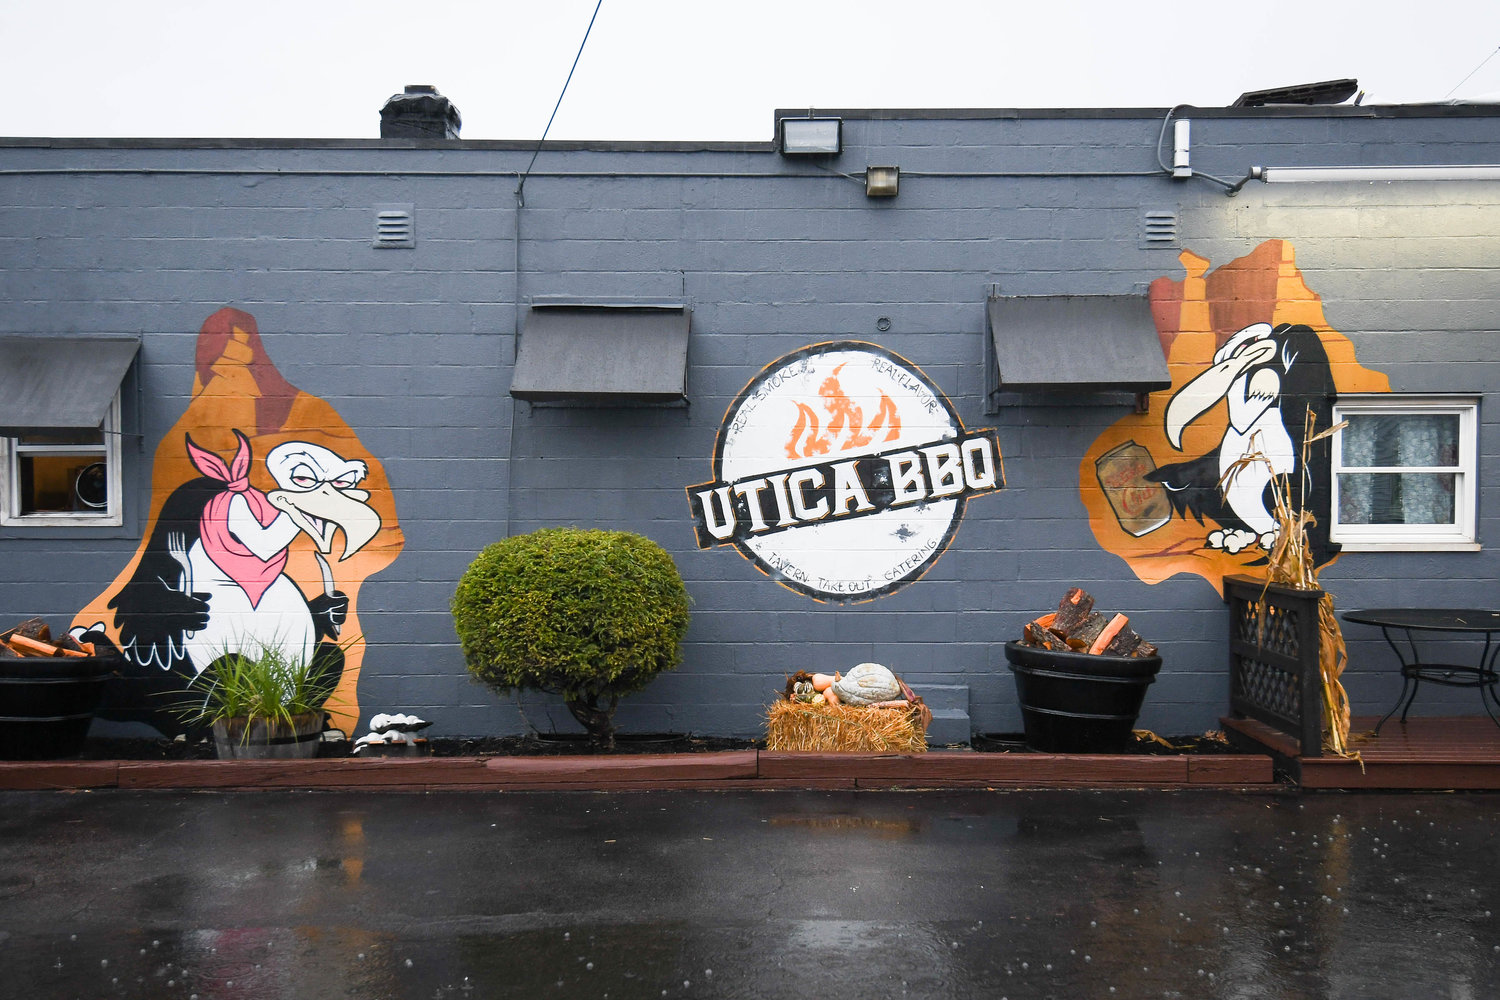 The new Utica BBQ located at 244 Roosevelt Drive.